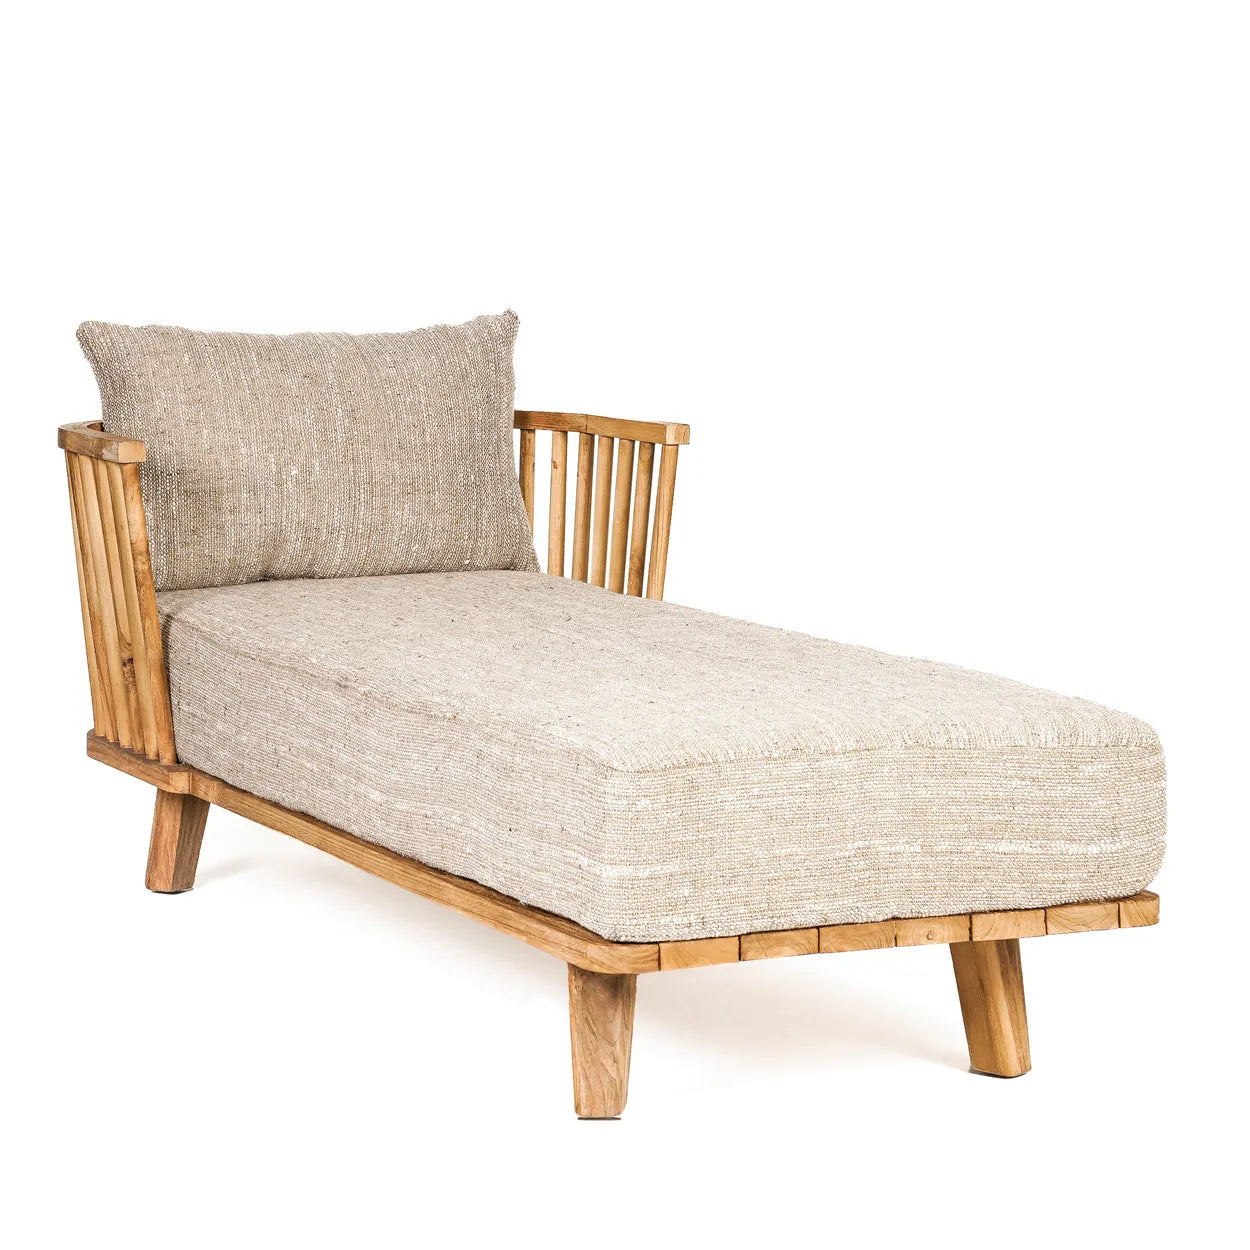 Arganda Daybed - crafted from reclaimed teak wood